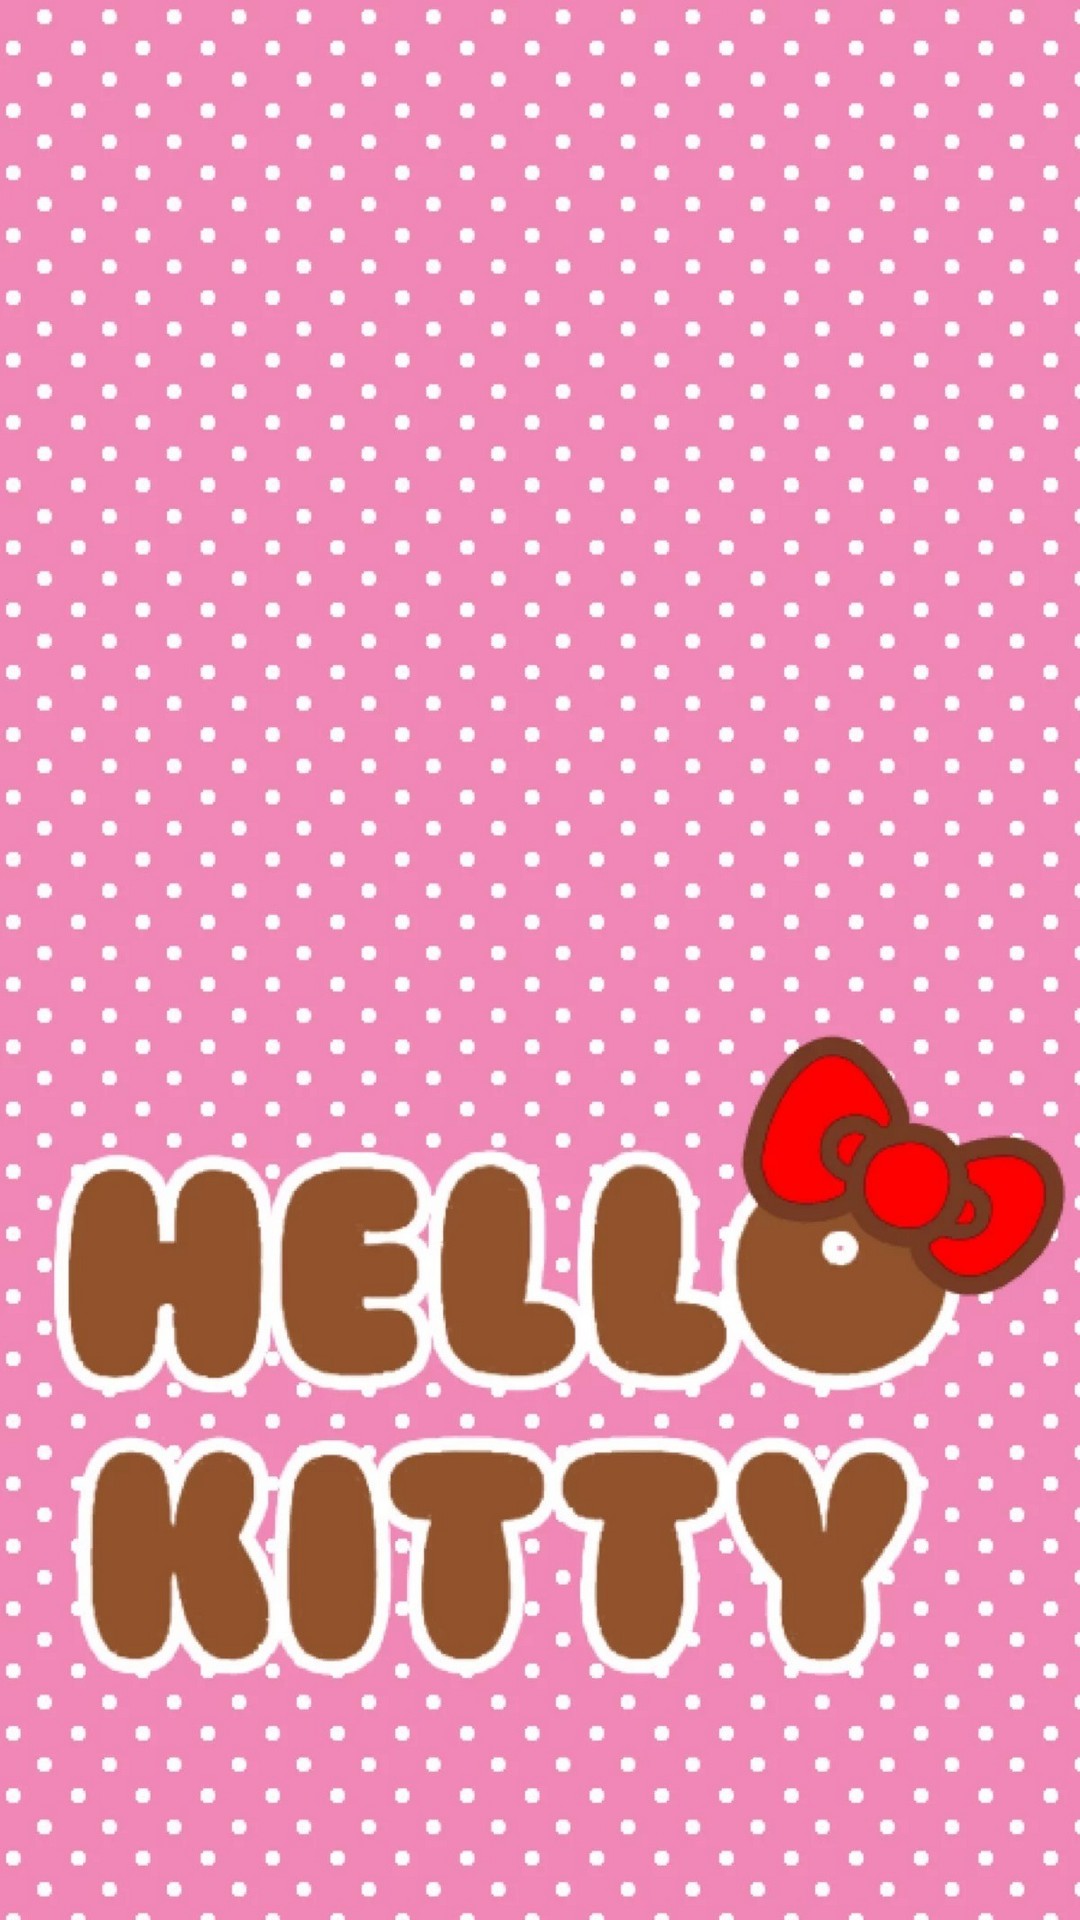 Hello Kitty iPhone 7 Plus Wallpaper with resolution 1080X1920 pixel. You can use this wallpaper as background for your desktop Computer Screensavers, Android or iPhone smartphones